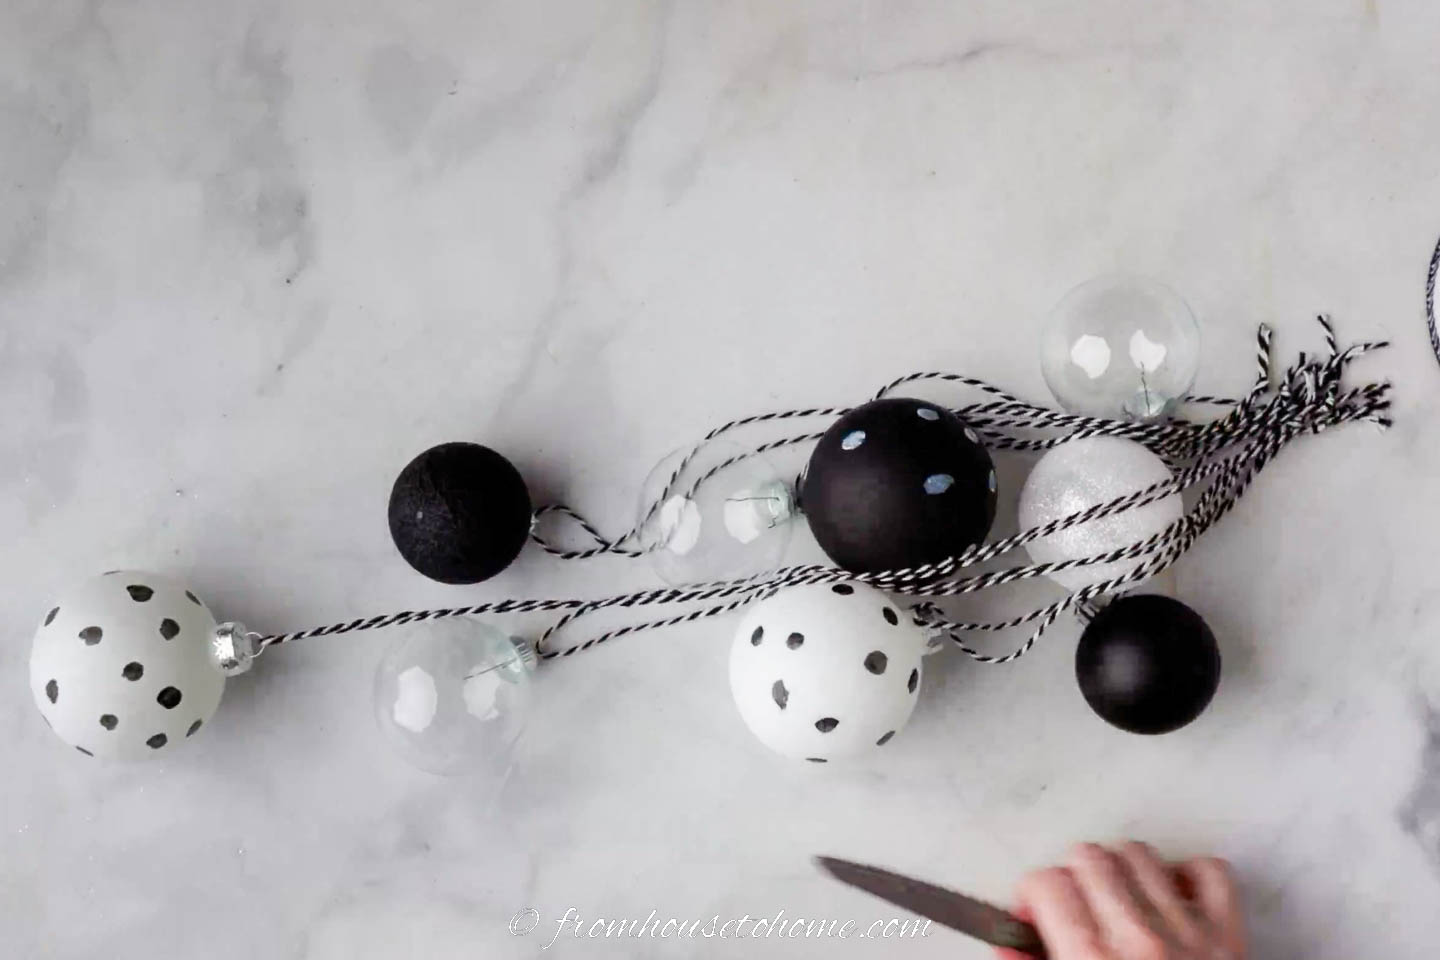 9 black and white ornaments with black and white string attached